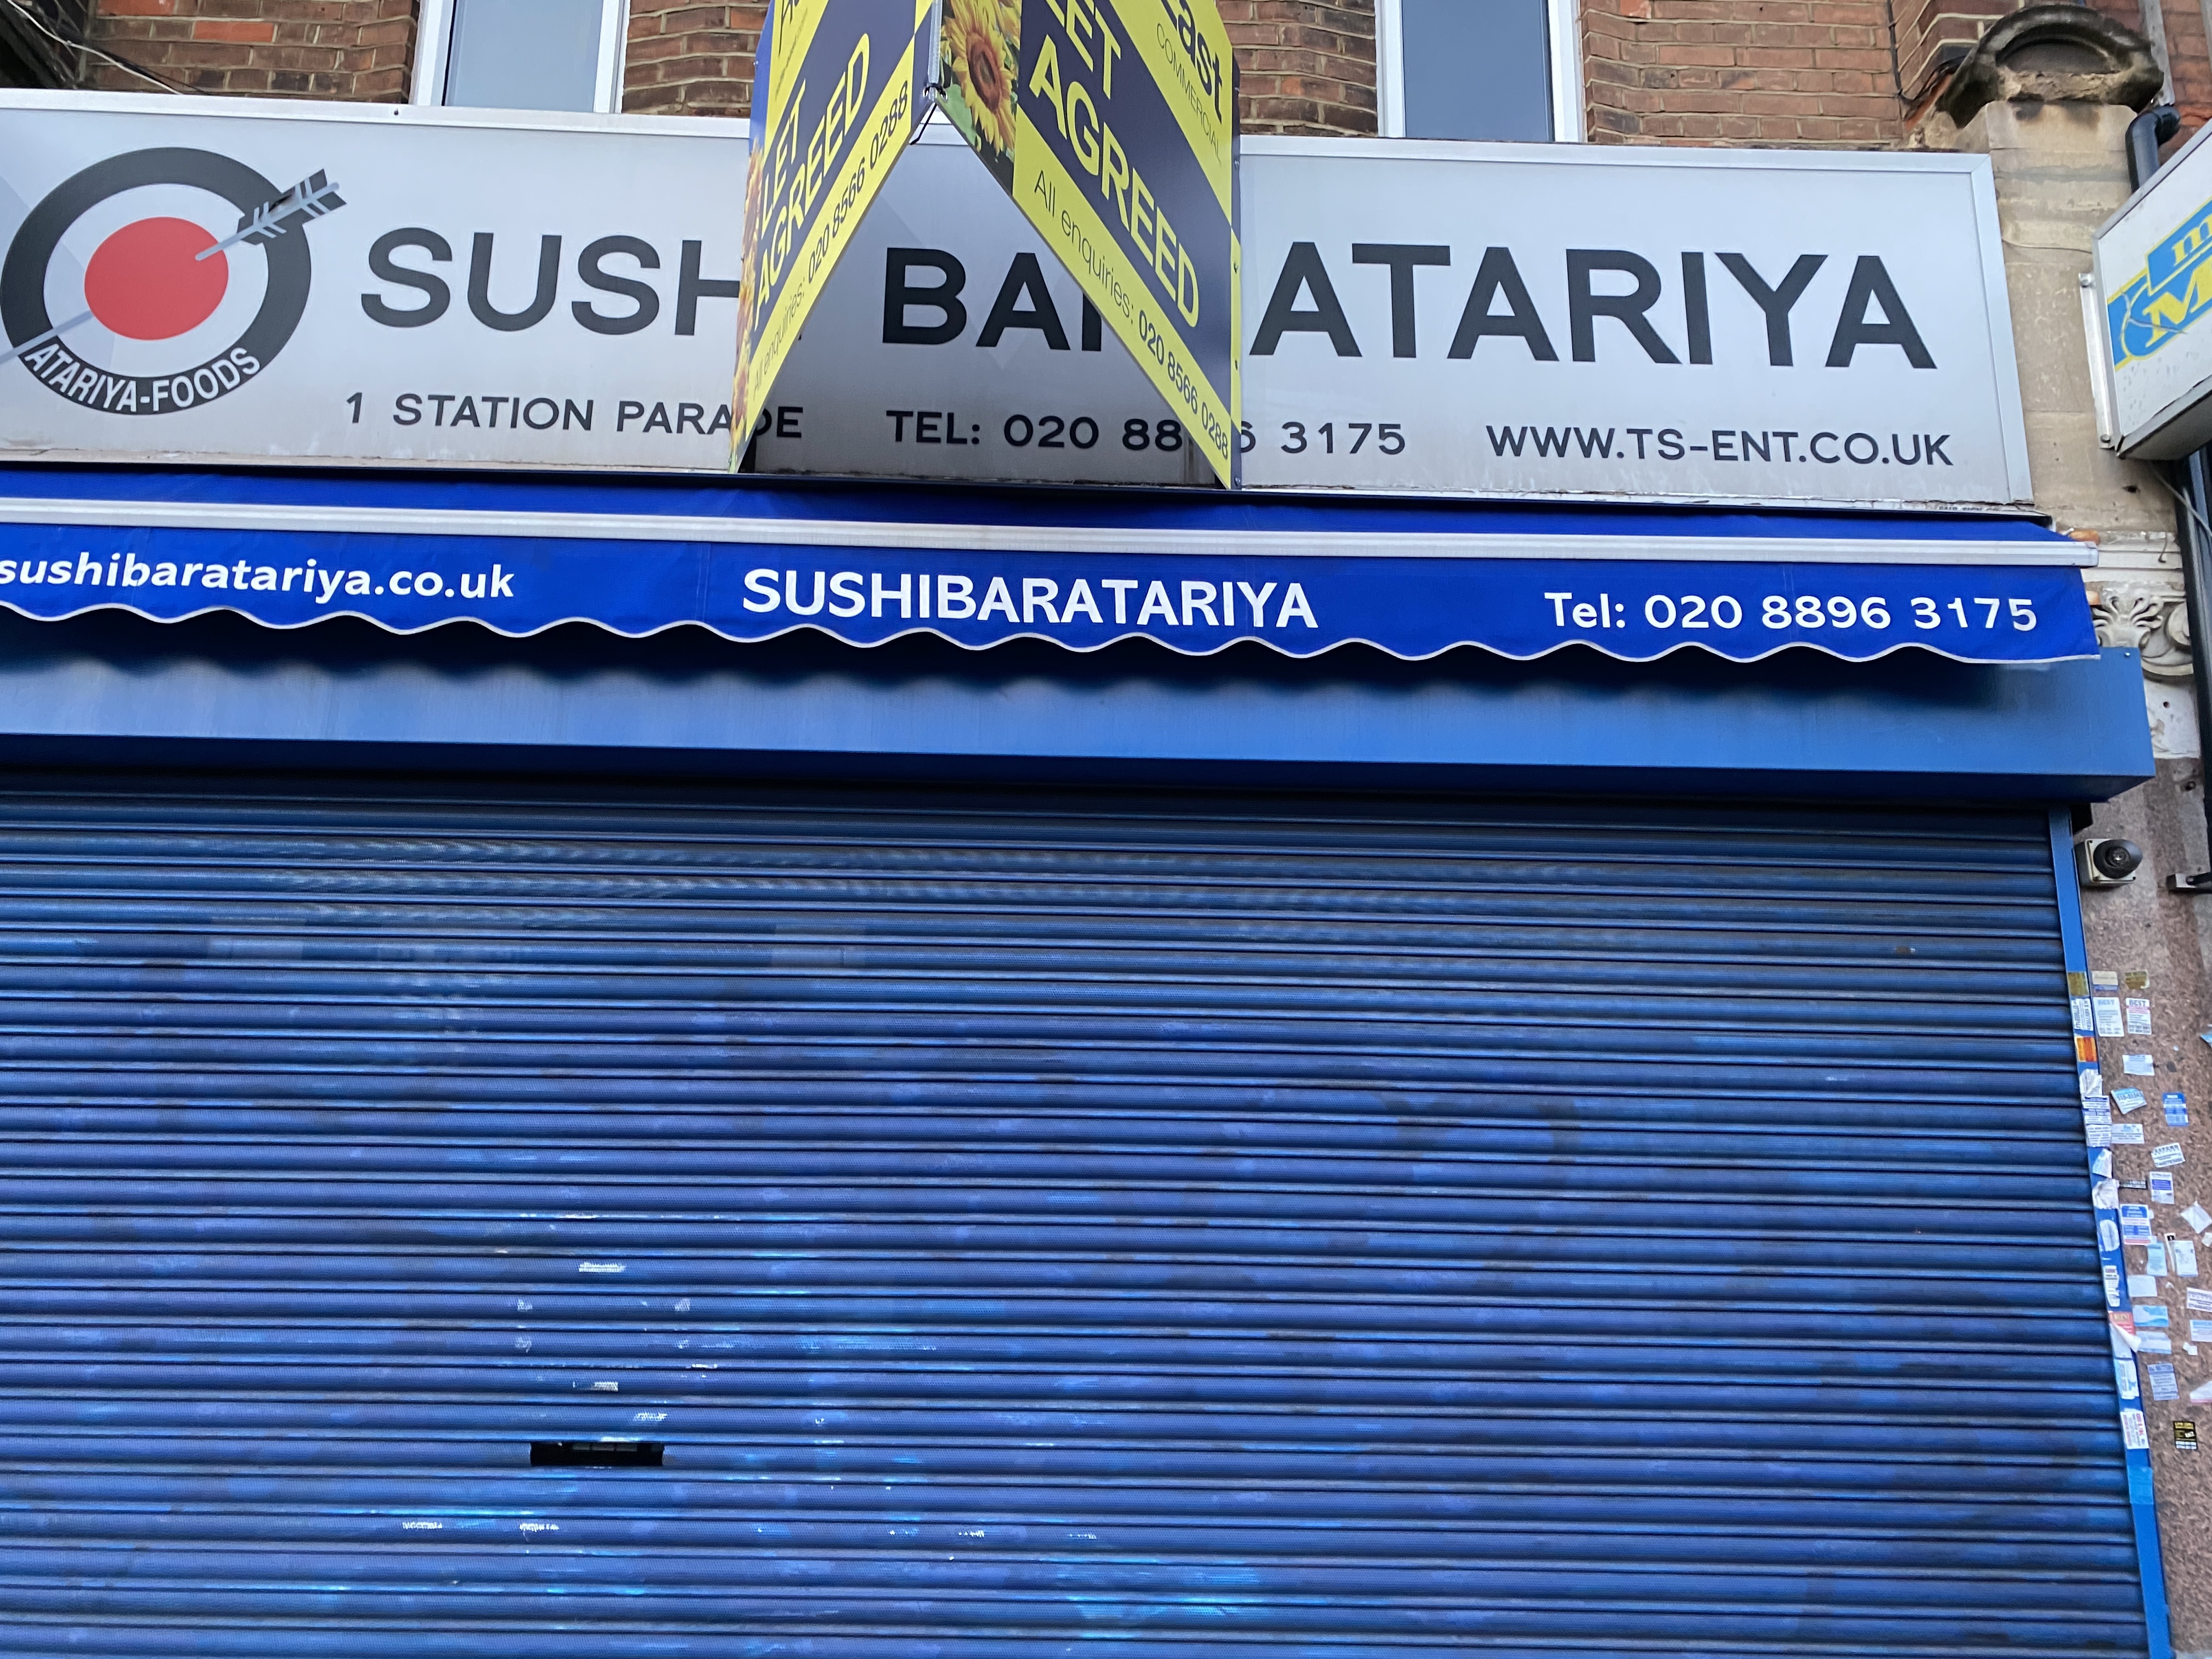 Sushi bar Atari-Ya in Ealing Common, with blue shutters up and a let agreed sign on top of the branding